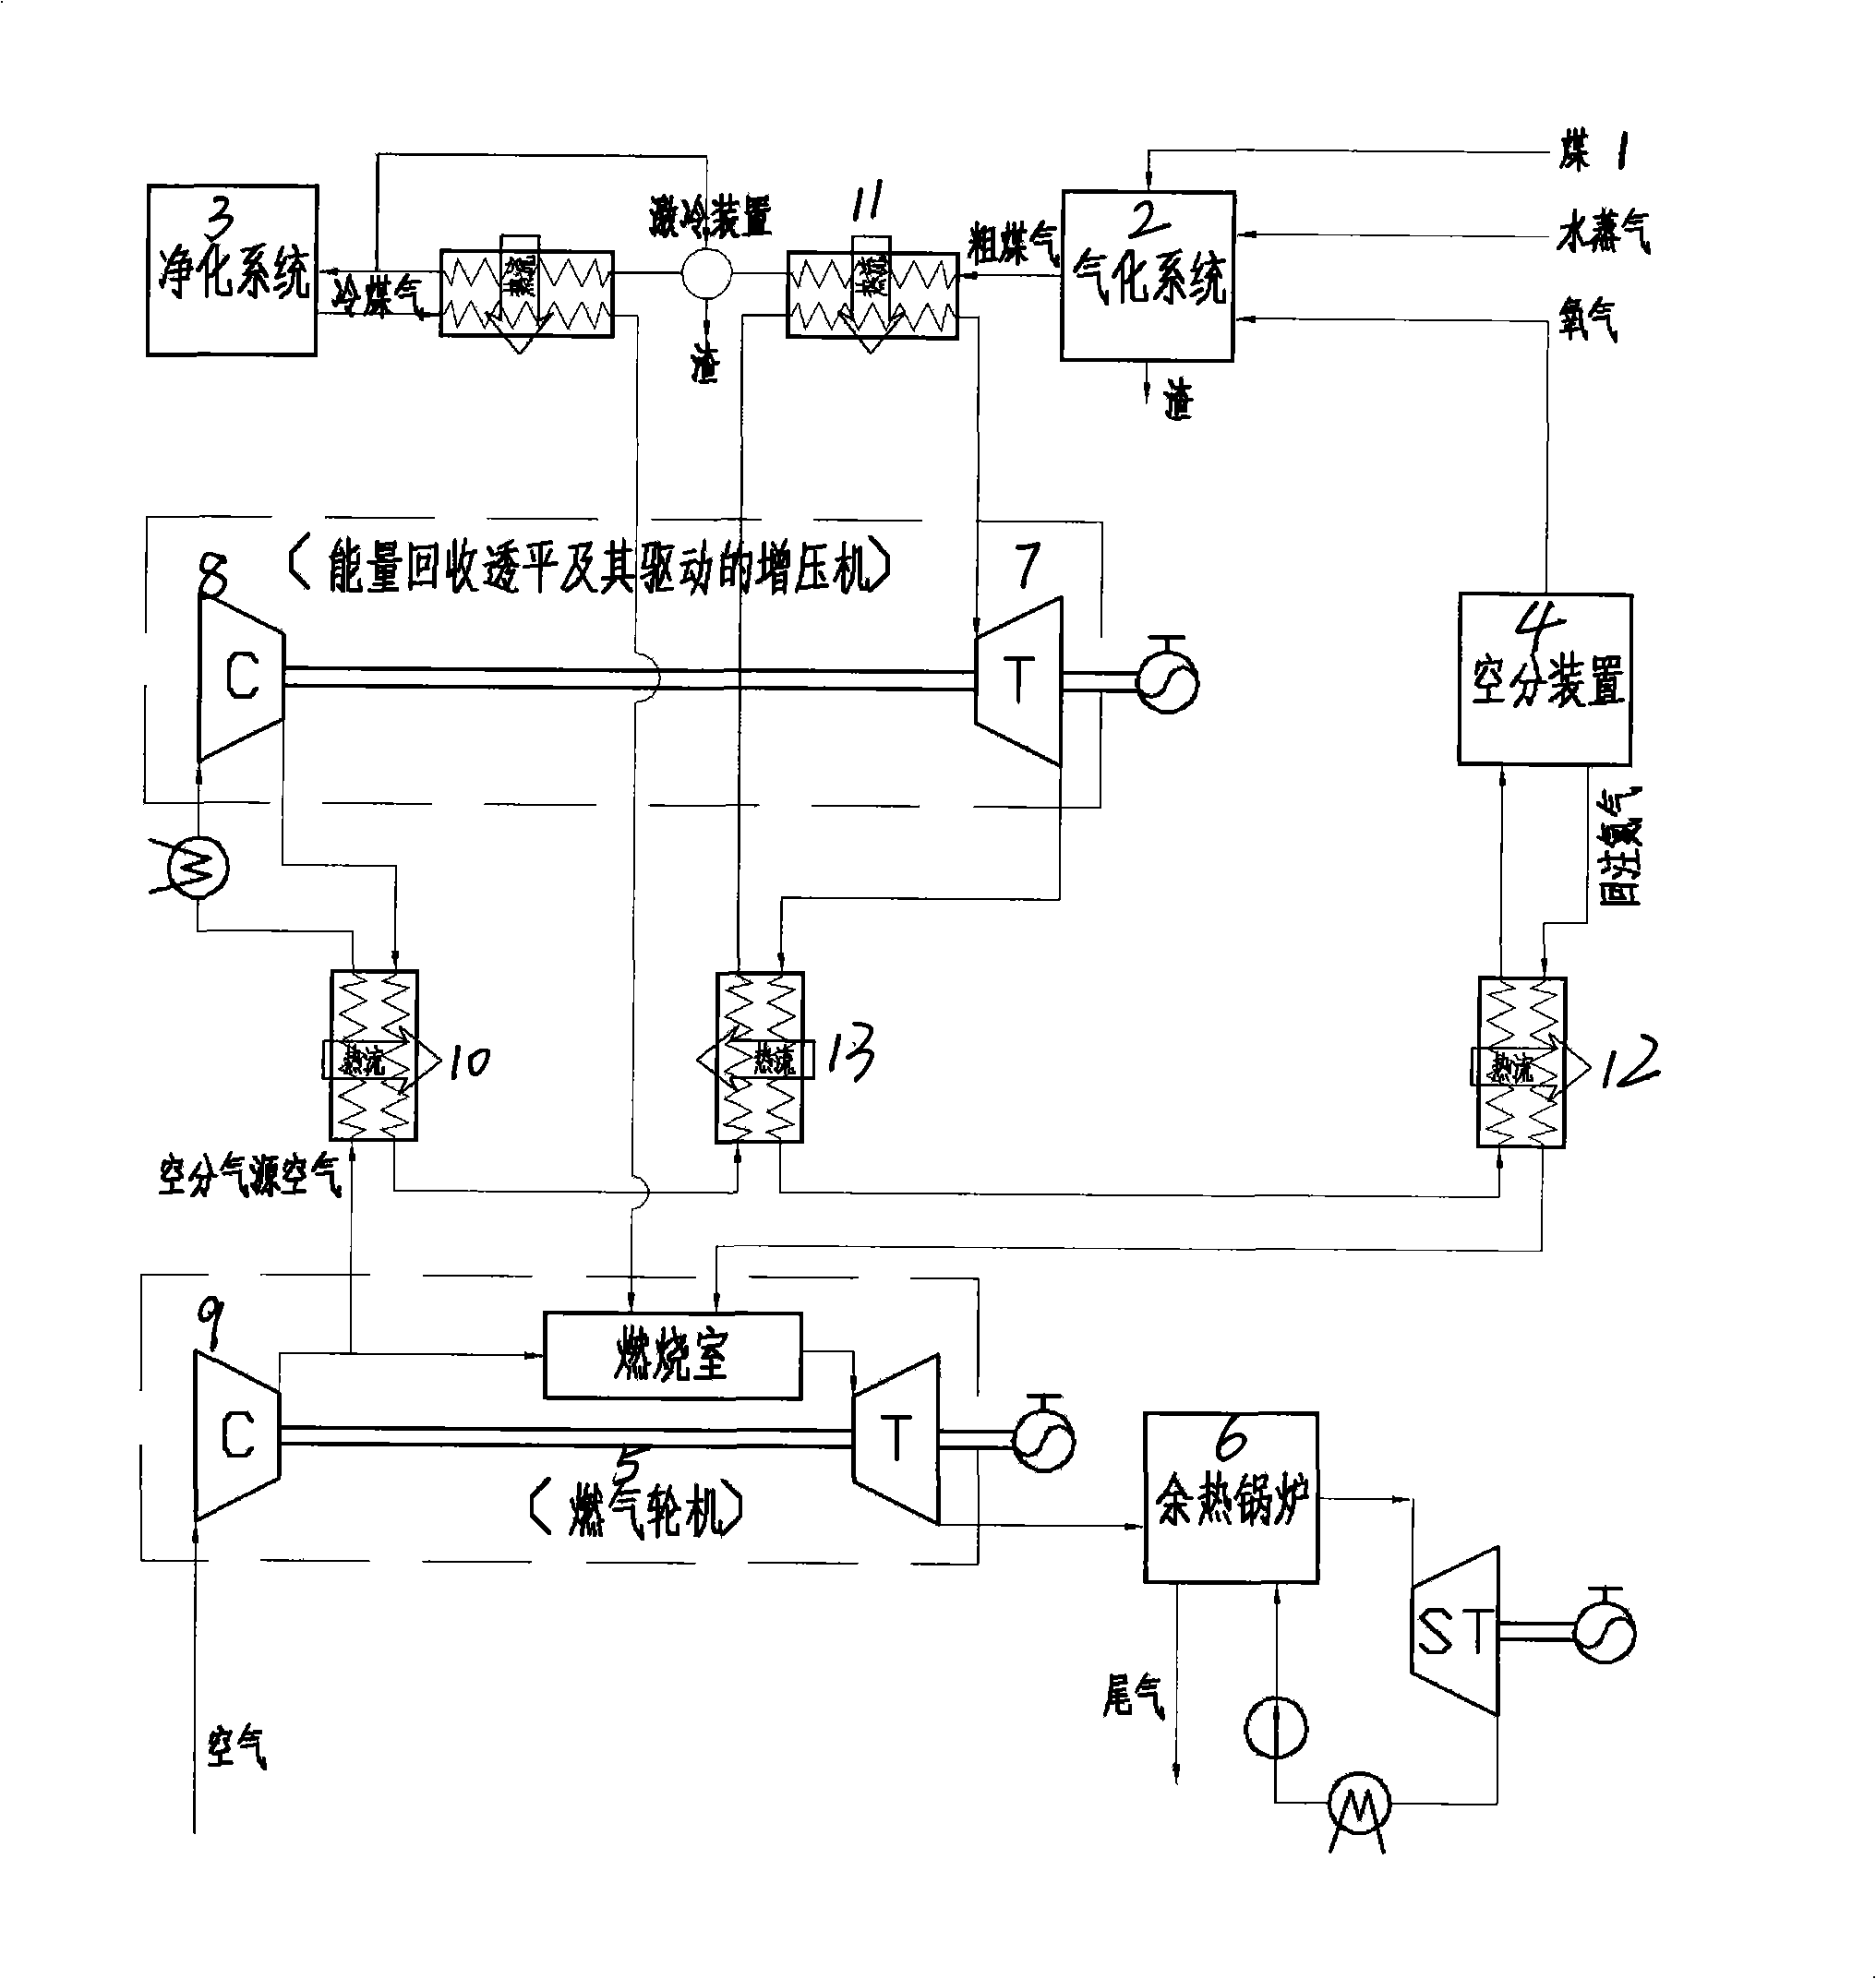 Energy conversion and recovering method of coal gasification supercharging association circulating power generation system